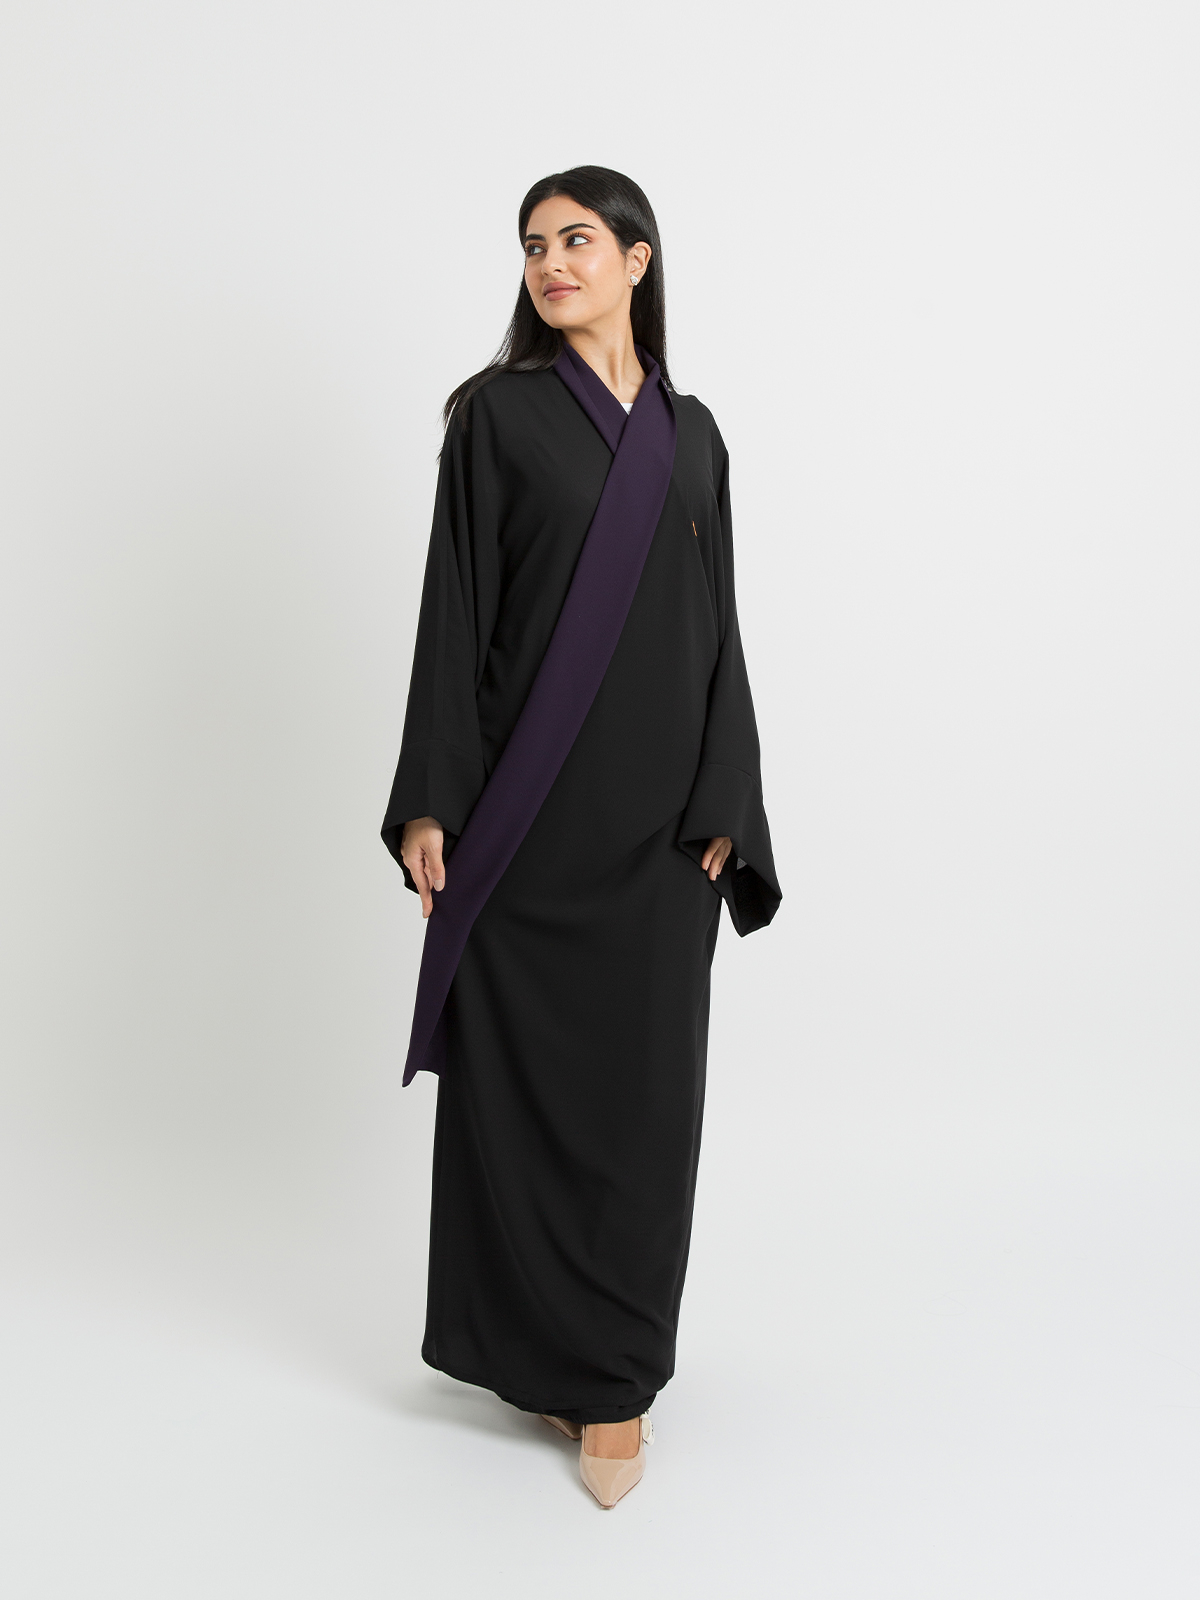 Black with Orchid - Flowstyle Abaya